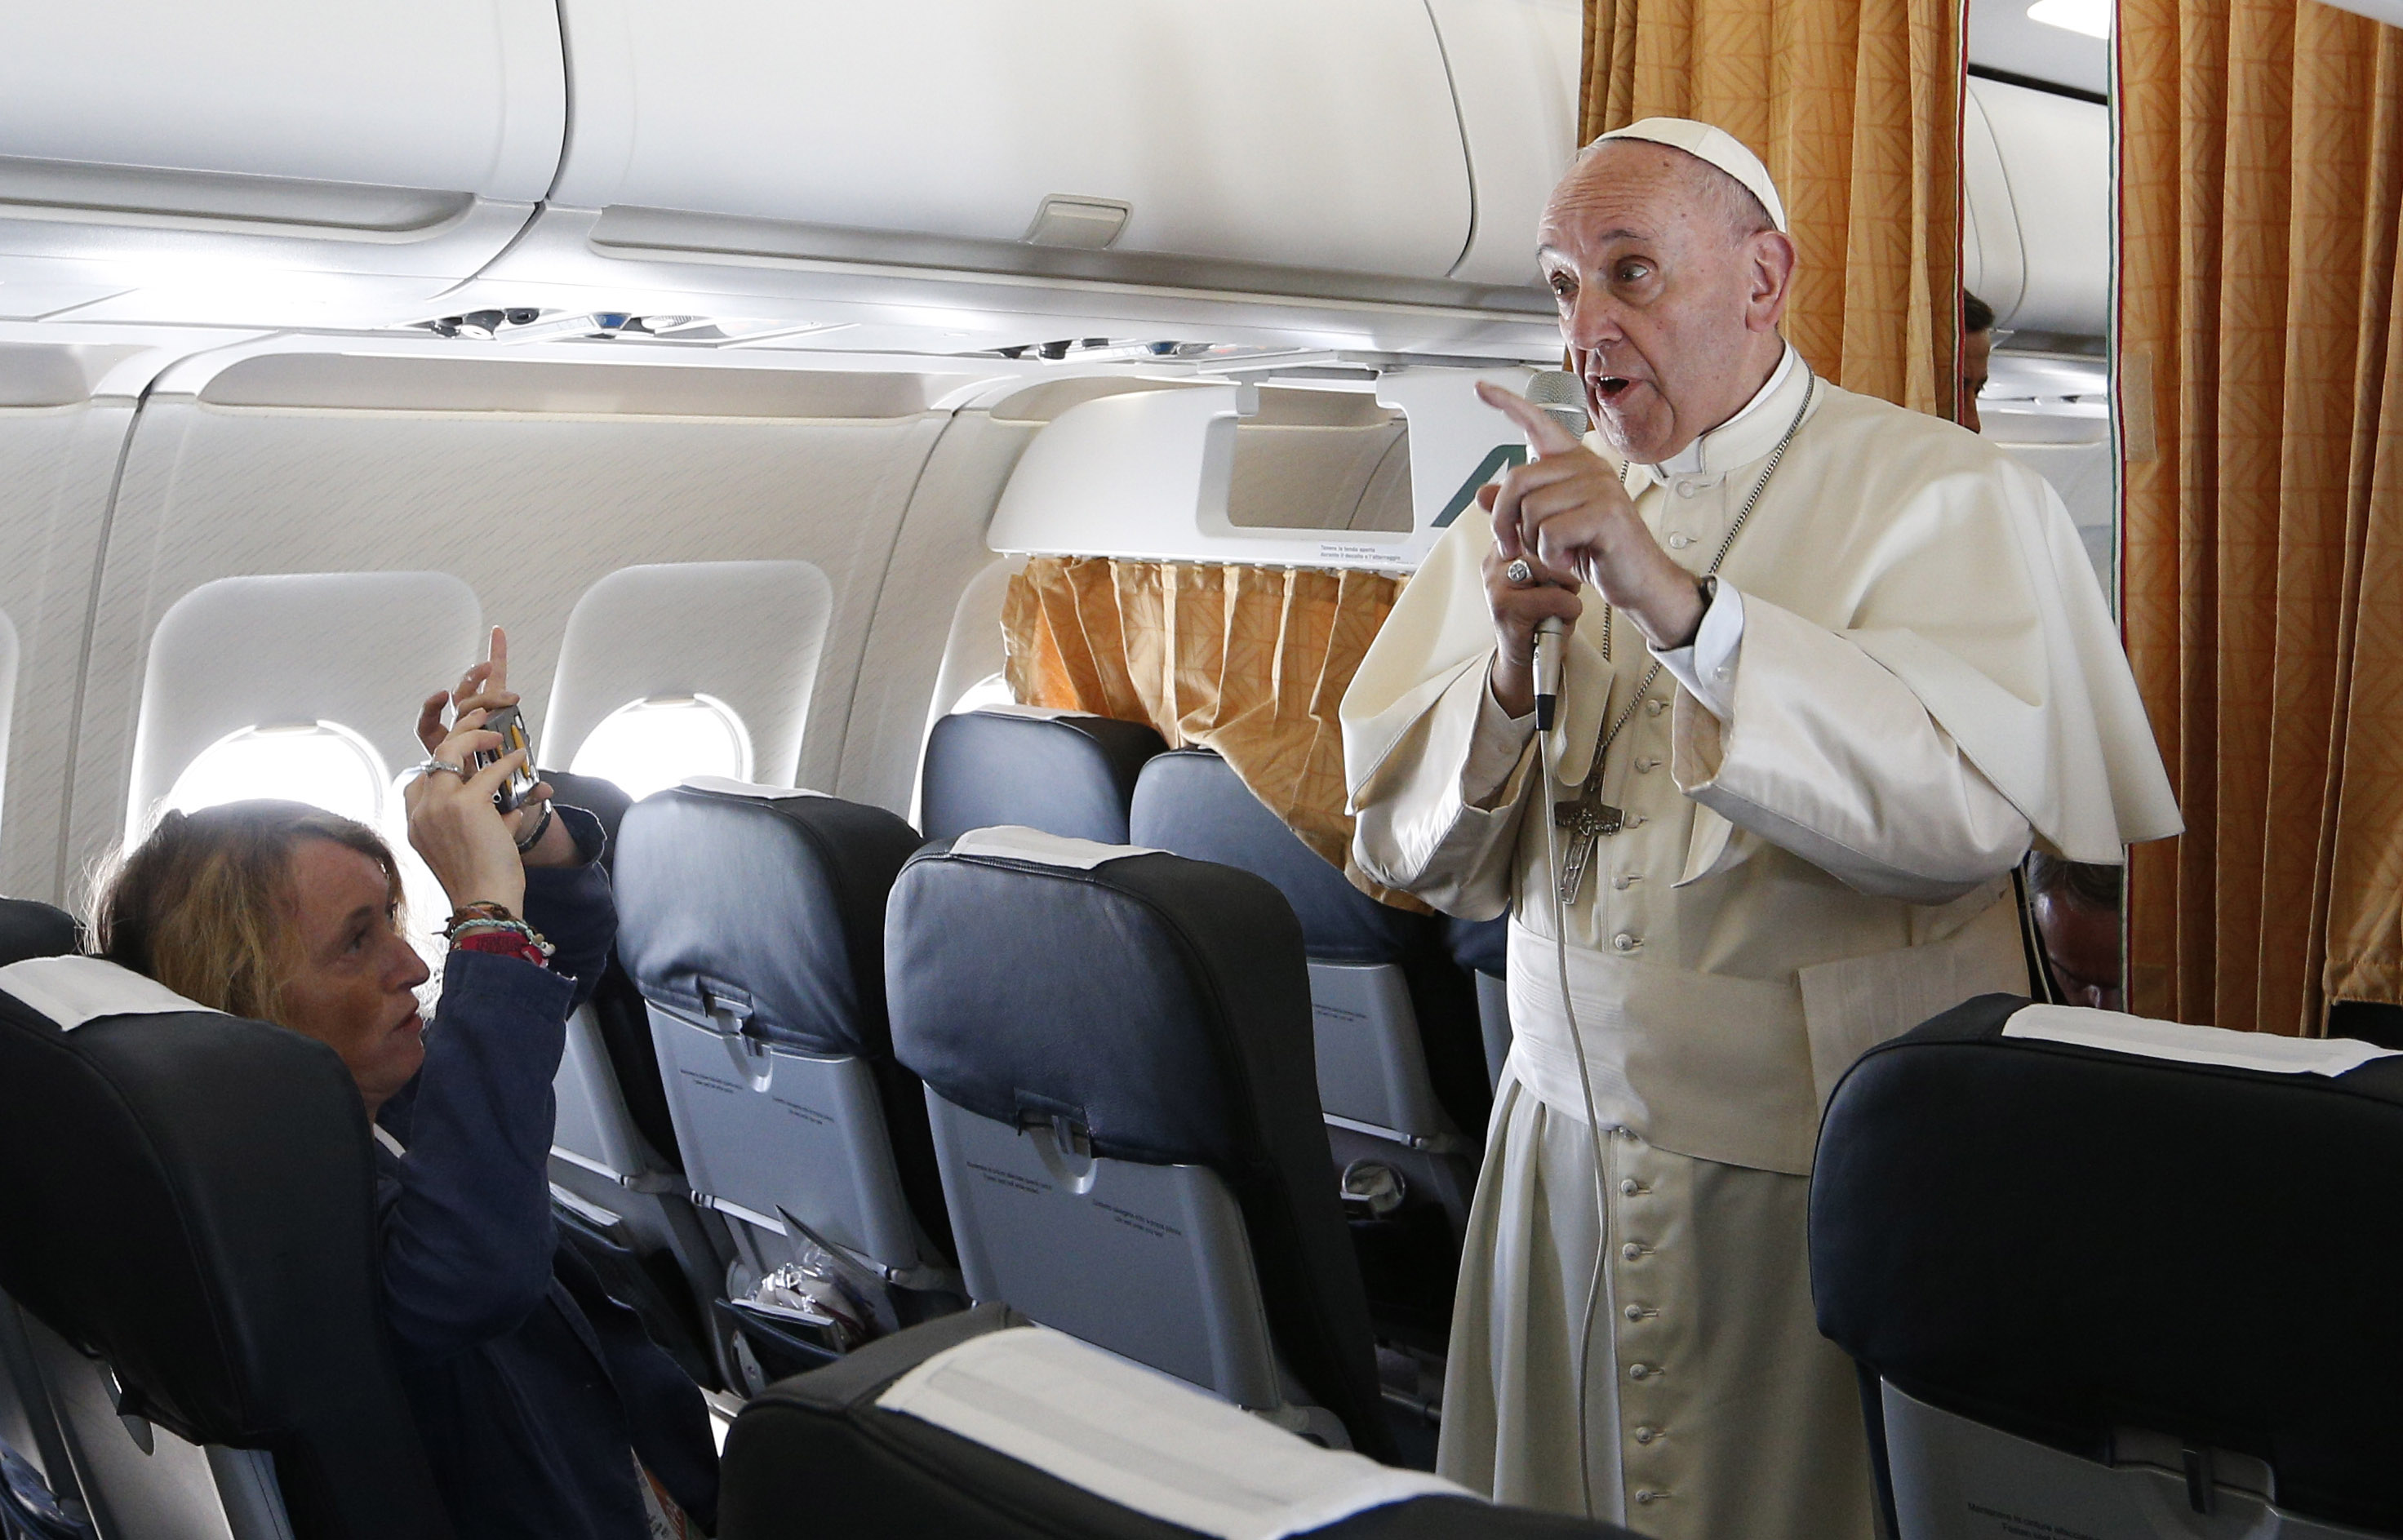 Pope Francis speaks to journalists aboard his flight from Rome to Krakow, Poland, July 27. The pope is attending World Youth Day in Krakow. (CNS photo/Paul Haring)